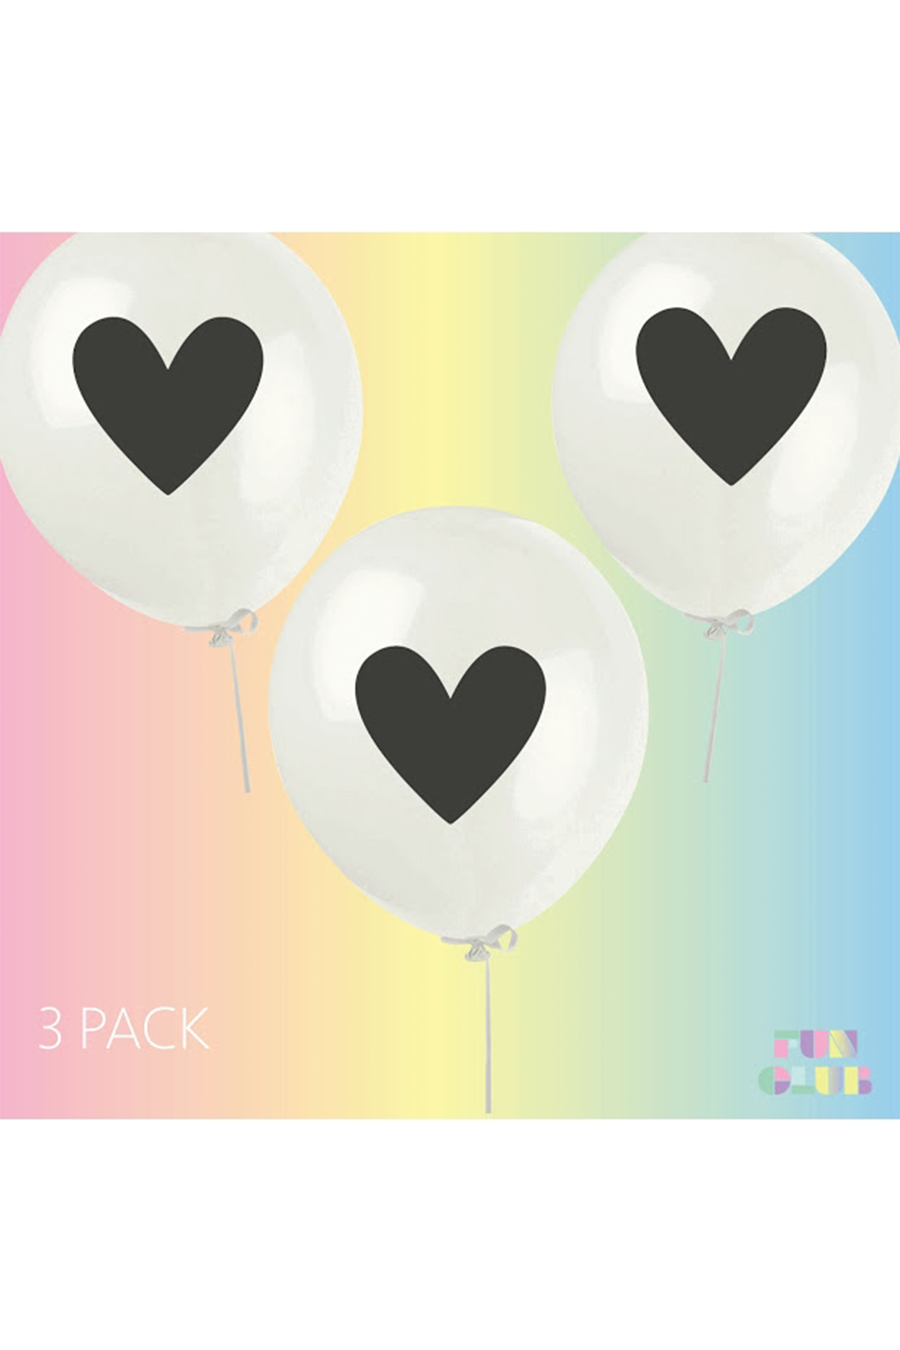 Heart Balloon Pack - Main Image Number 2 of 2